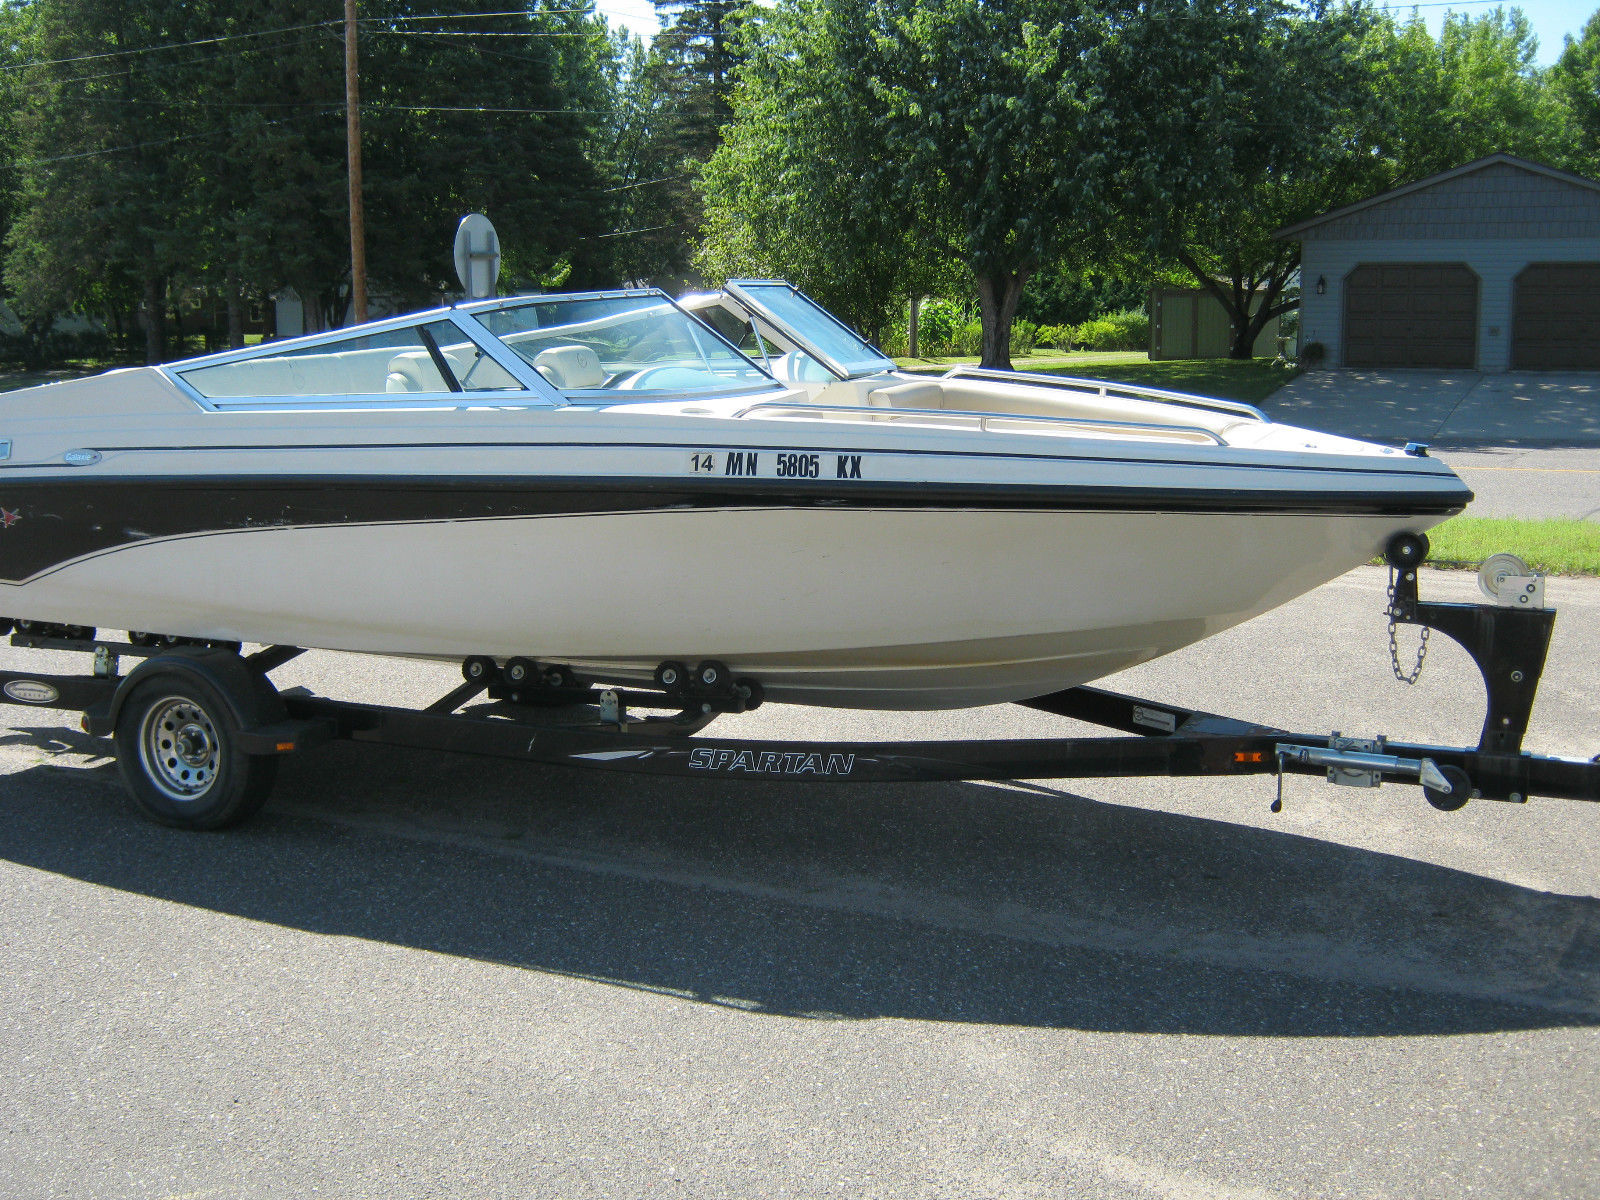 galaxie ultra 1995 for sale for $2,500 - boats-from-usa.com